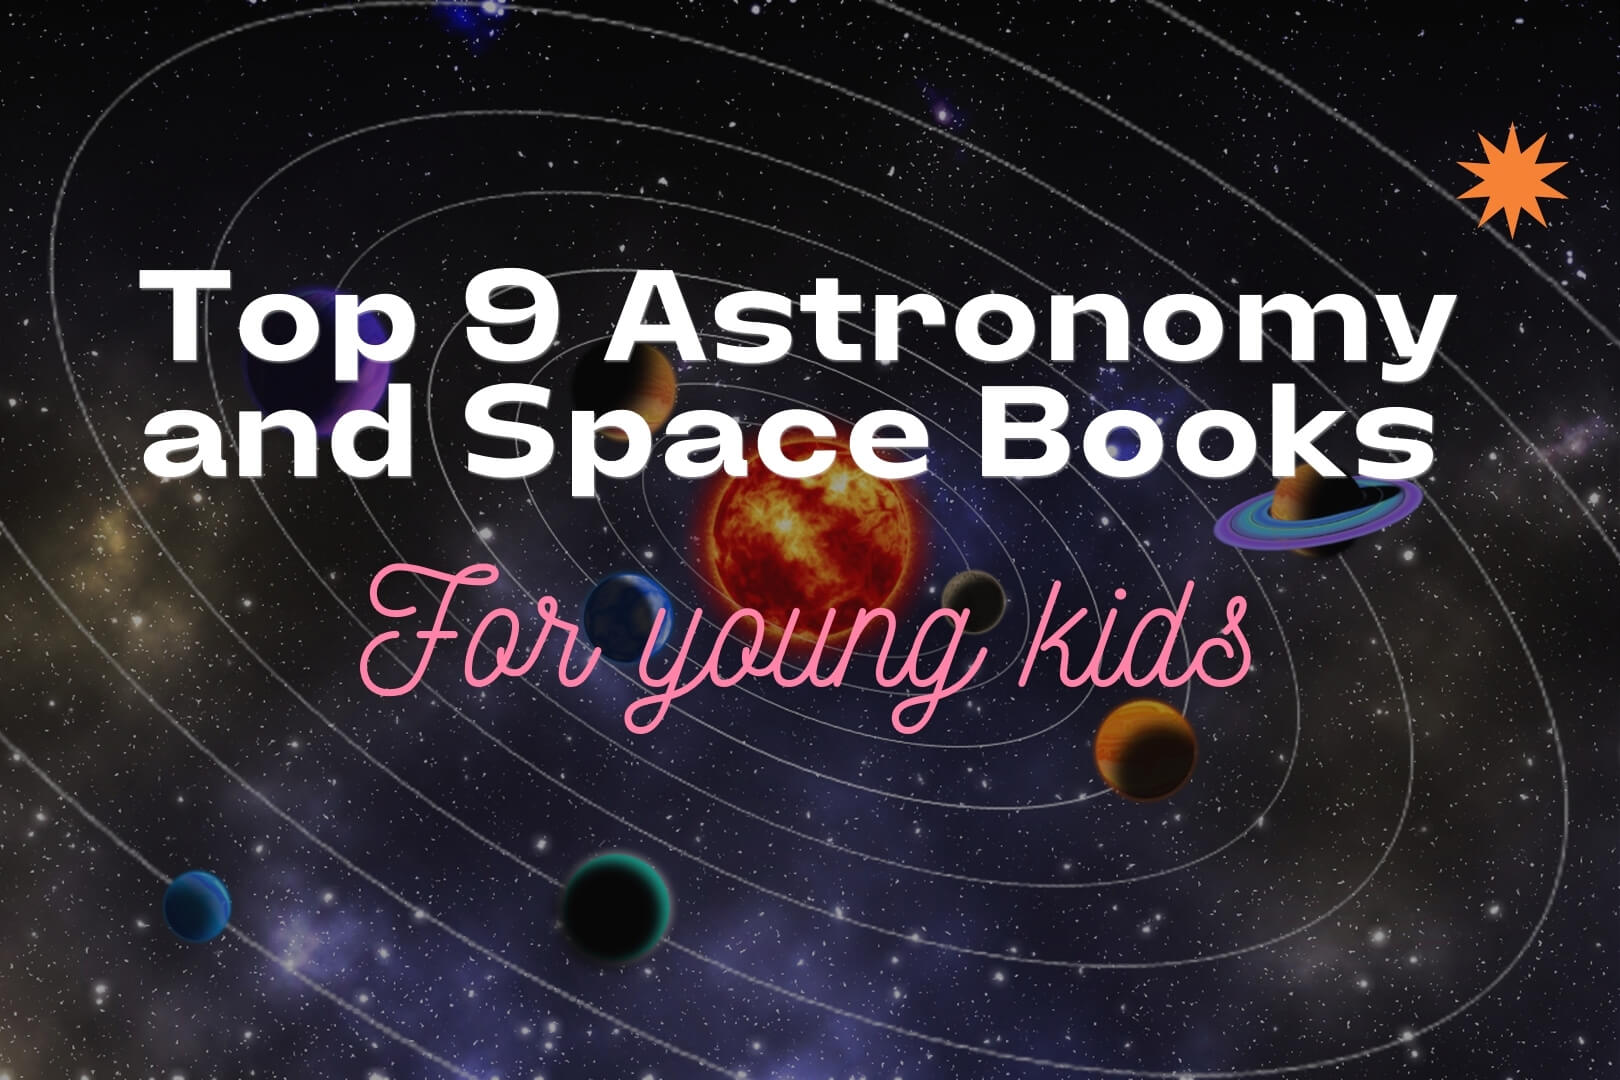 Top 9 Astronomy and Space Books for Young Kids in 2021